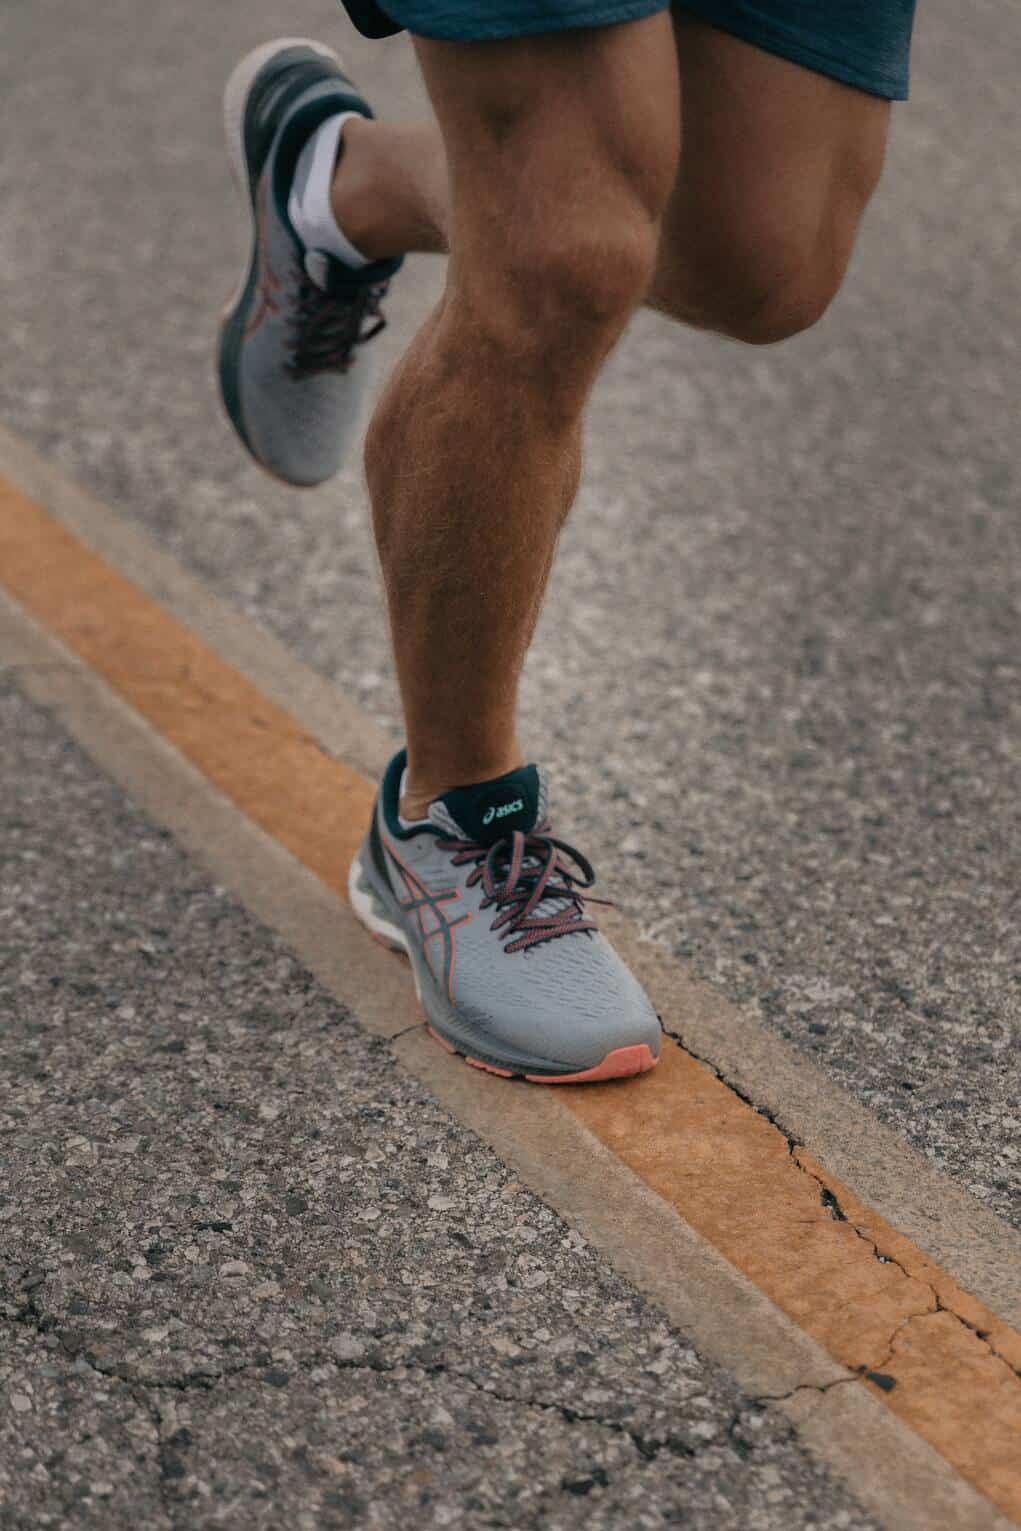 legs of a man jogging on the street in rubber shoes